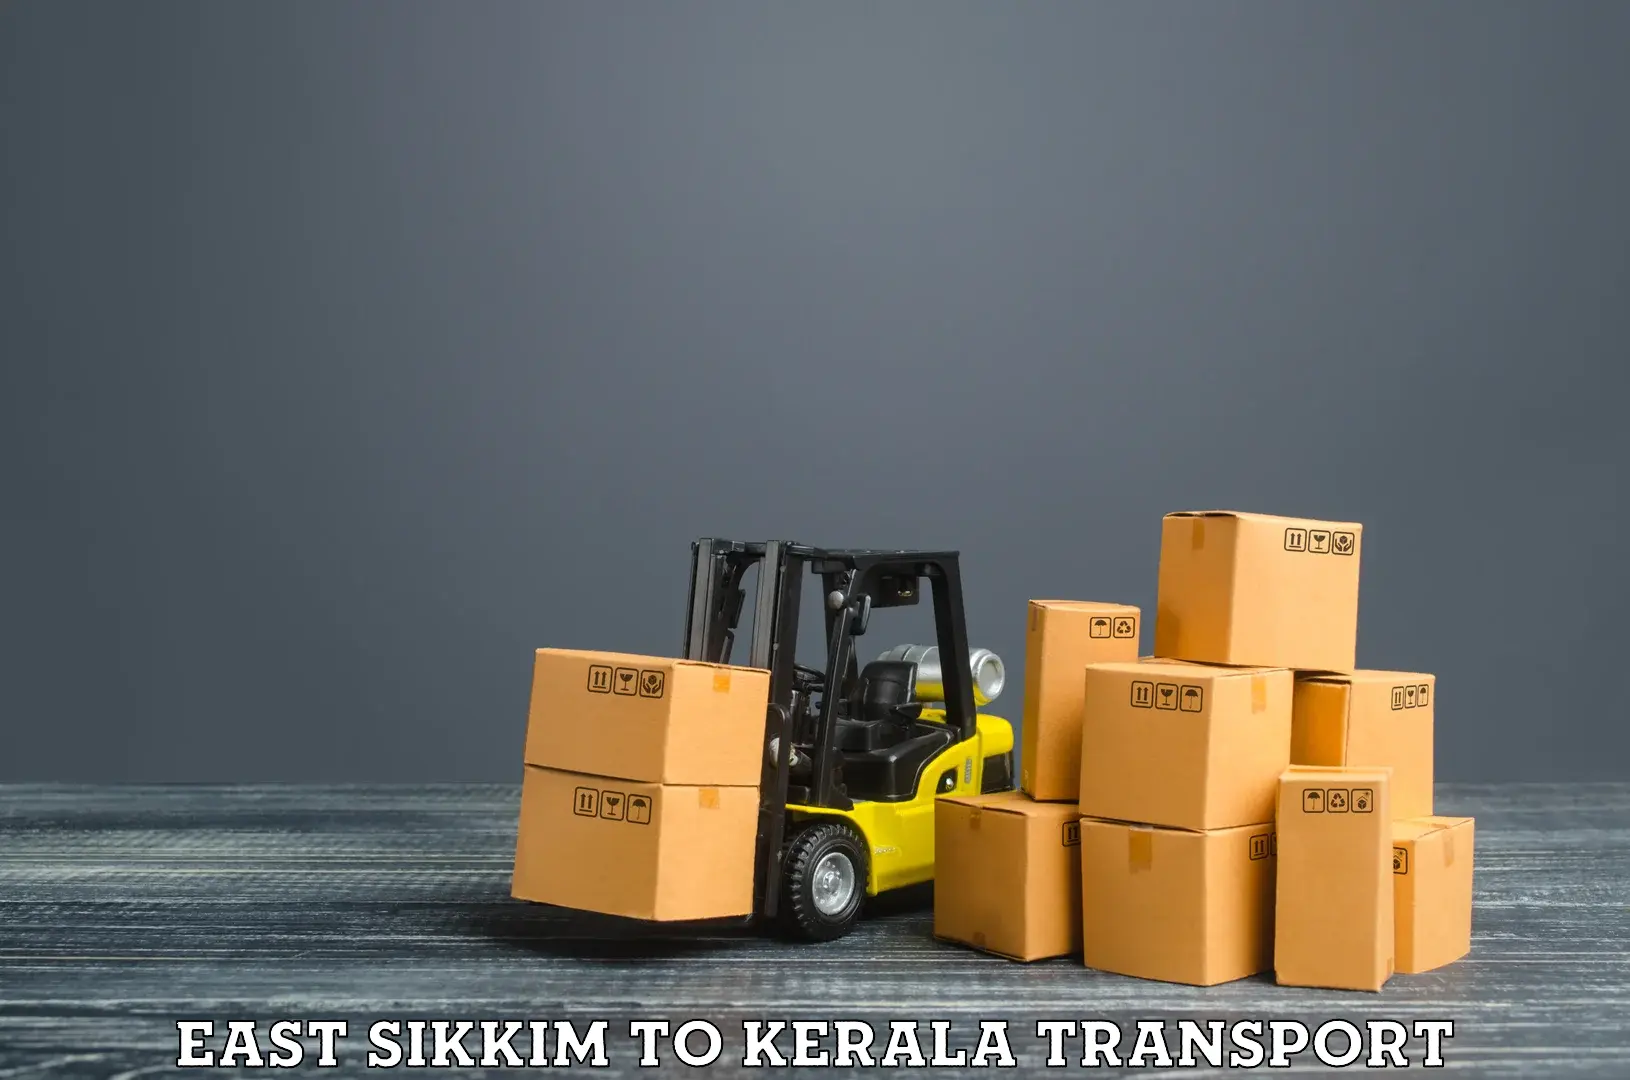 Furniture transport service in East Sikkim to Kerala